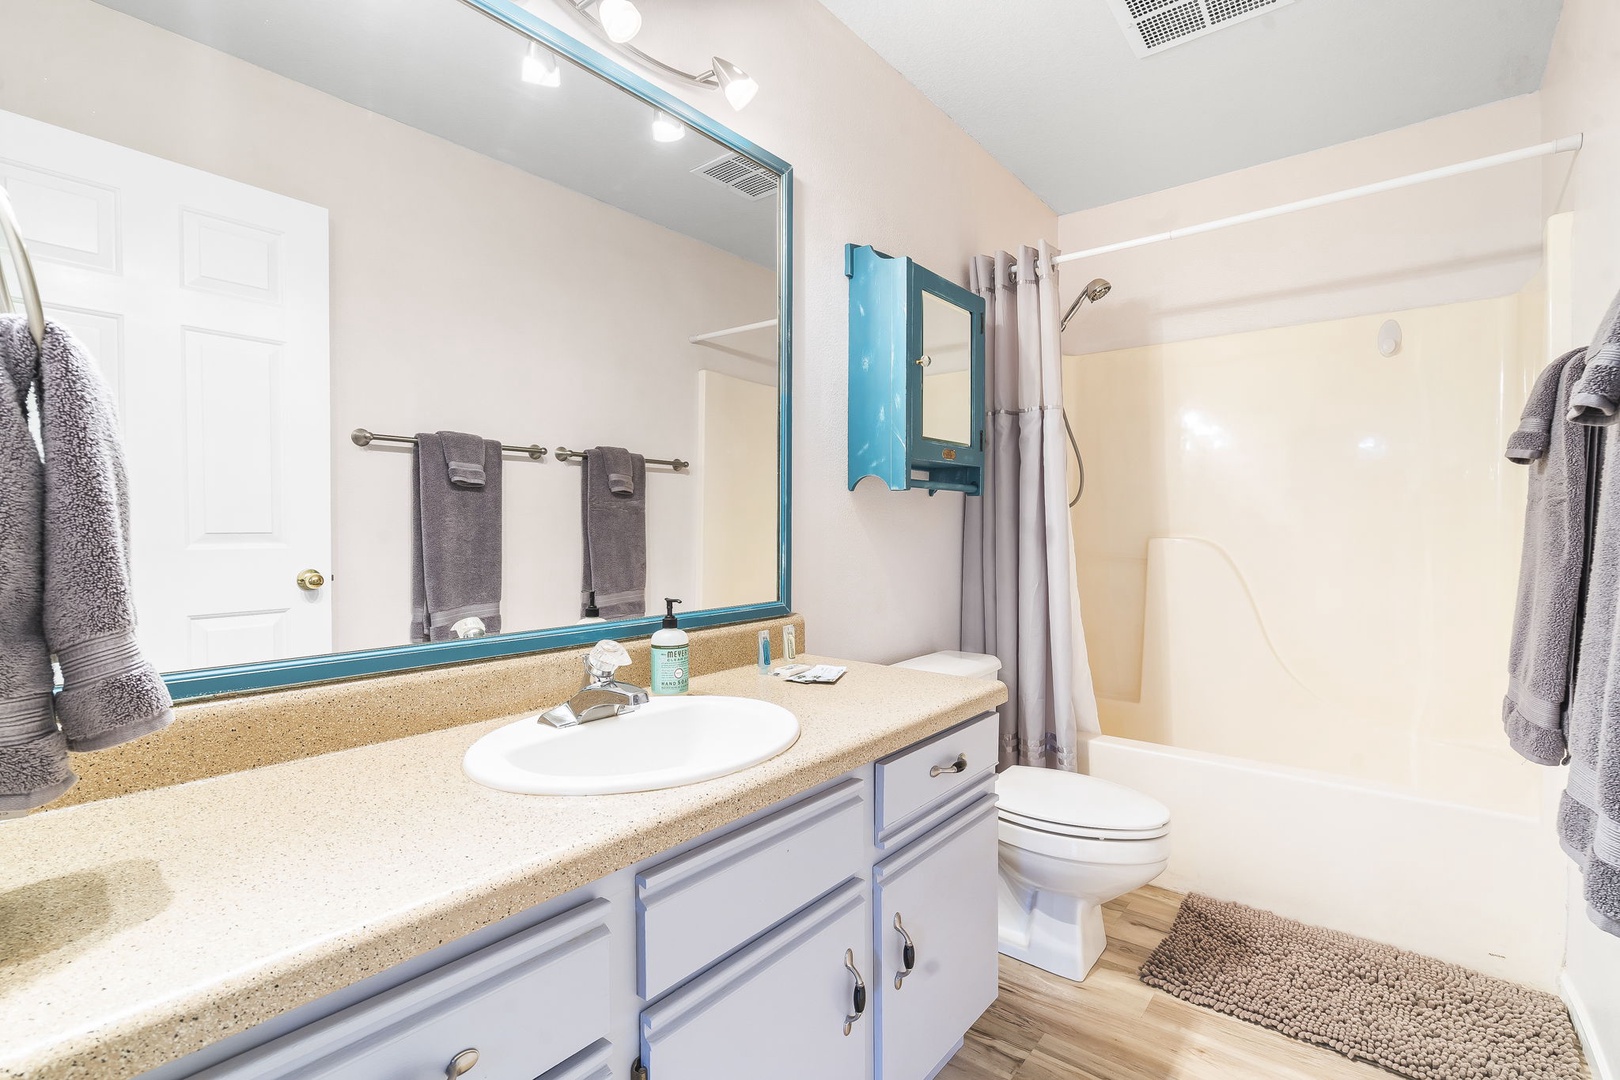 The 1st of 2 full bathrooms includes a large single vanity & shower/tub combo